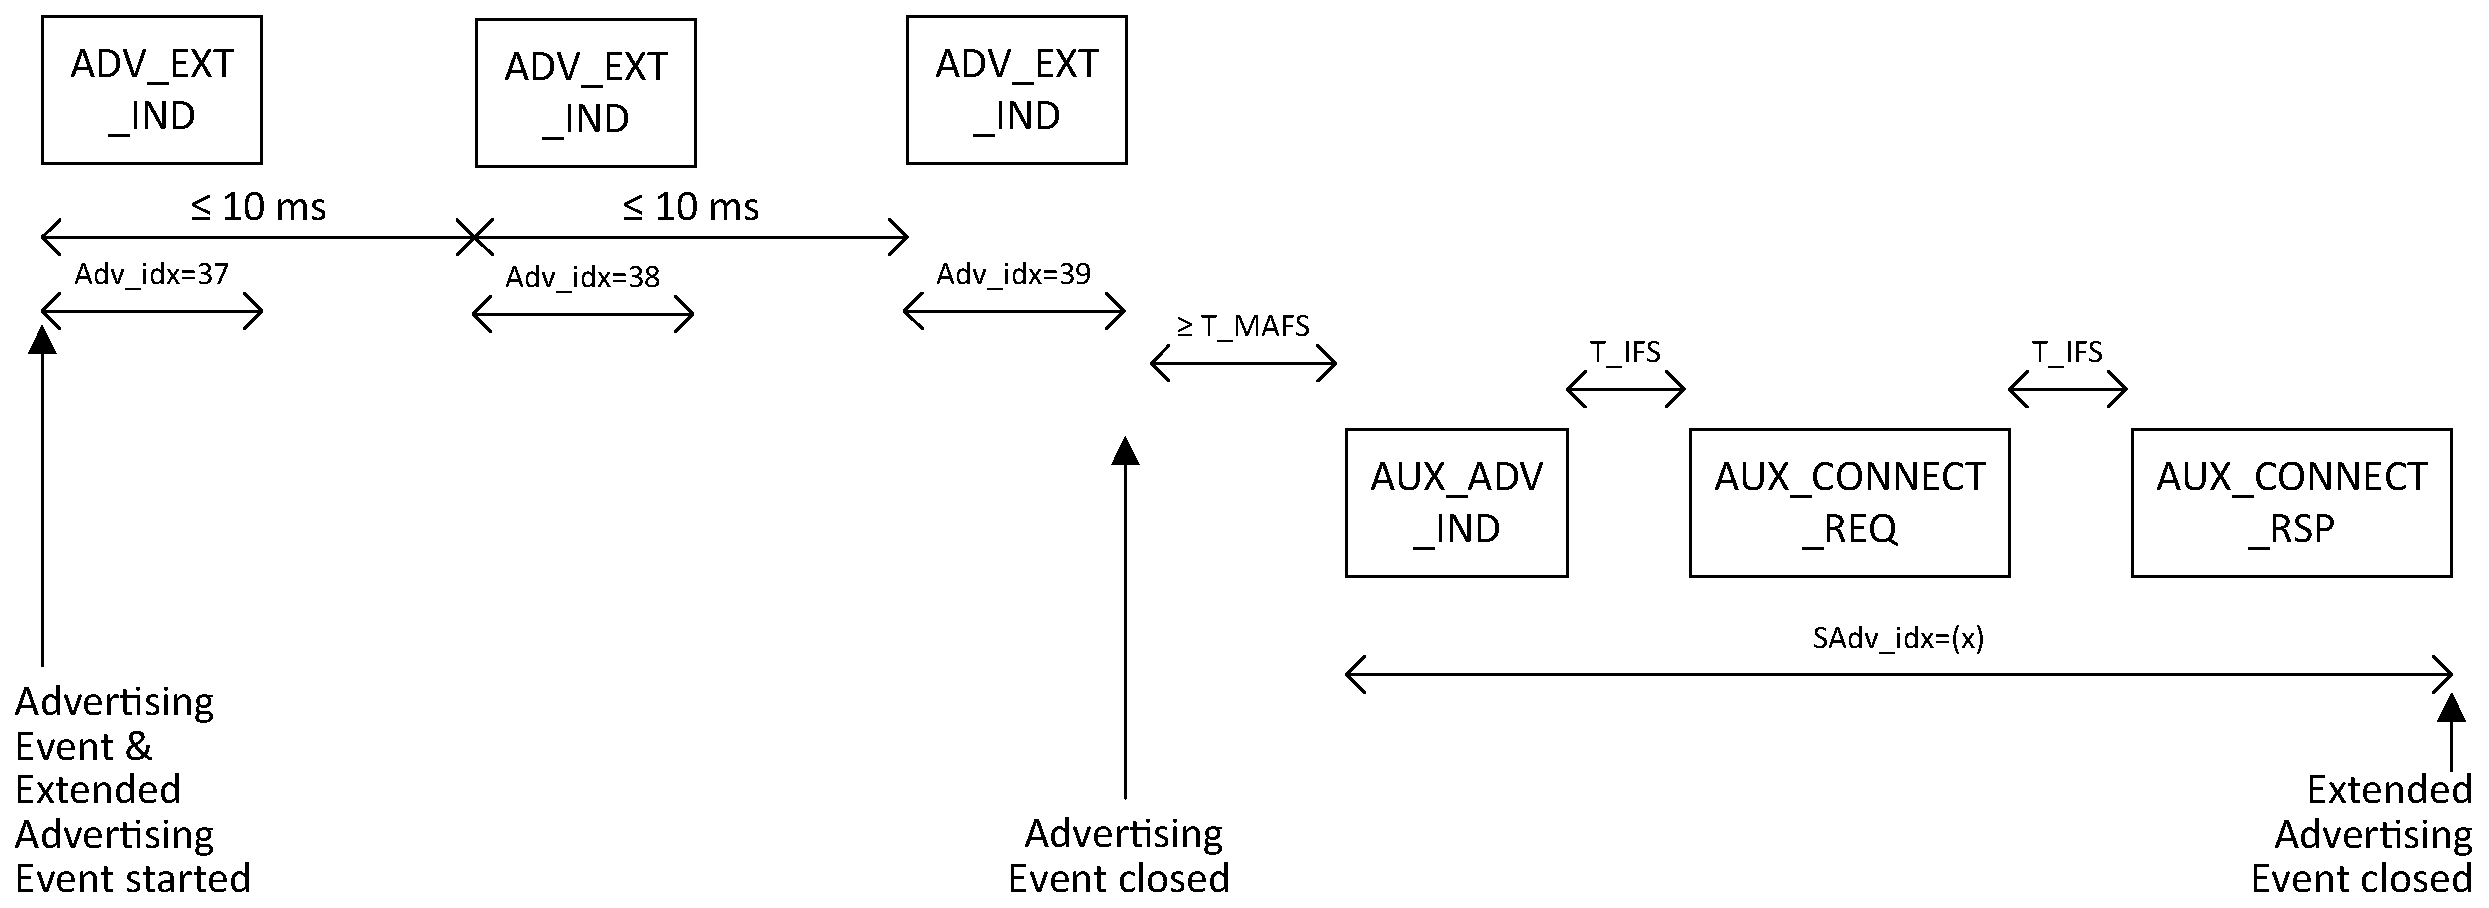 Connectable directed advertising event using ADV_EXT_IND PDUs and AUX_ADV_IND PDUs containing advertising data with an AUX_CONNECT_REQ PDU